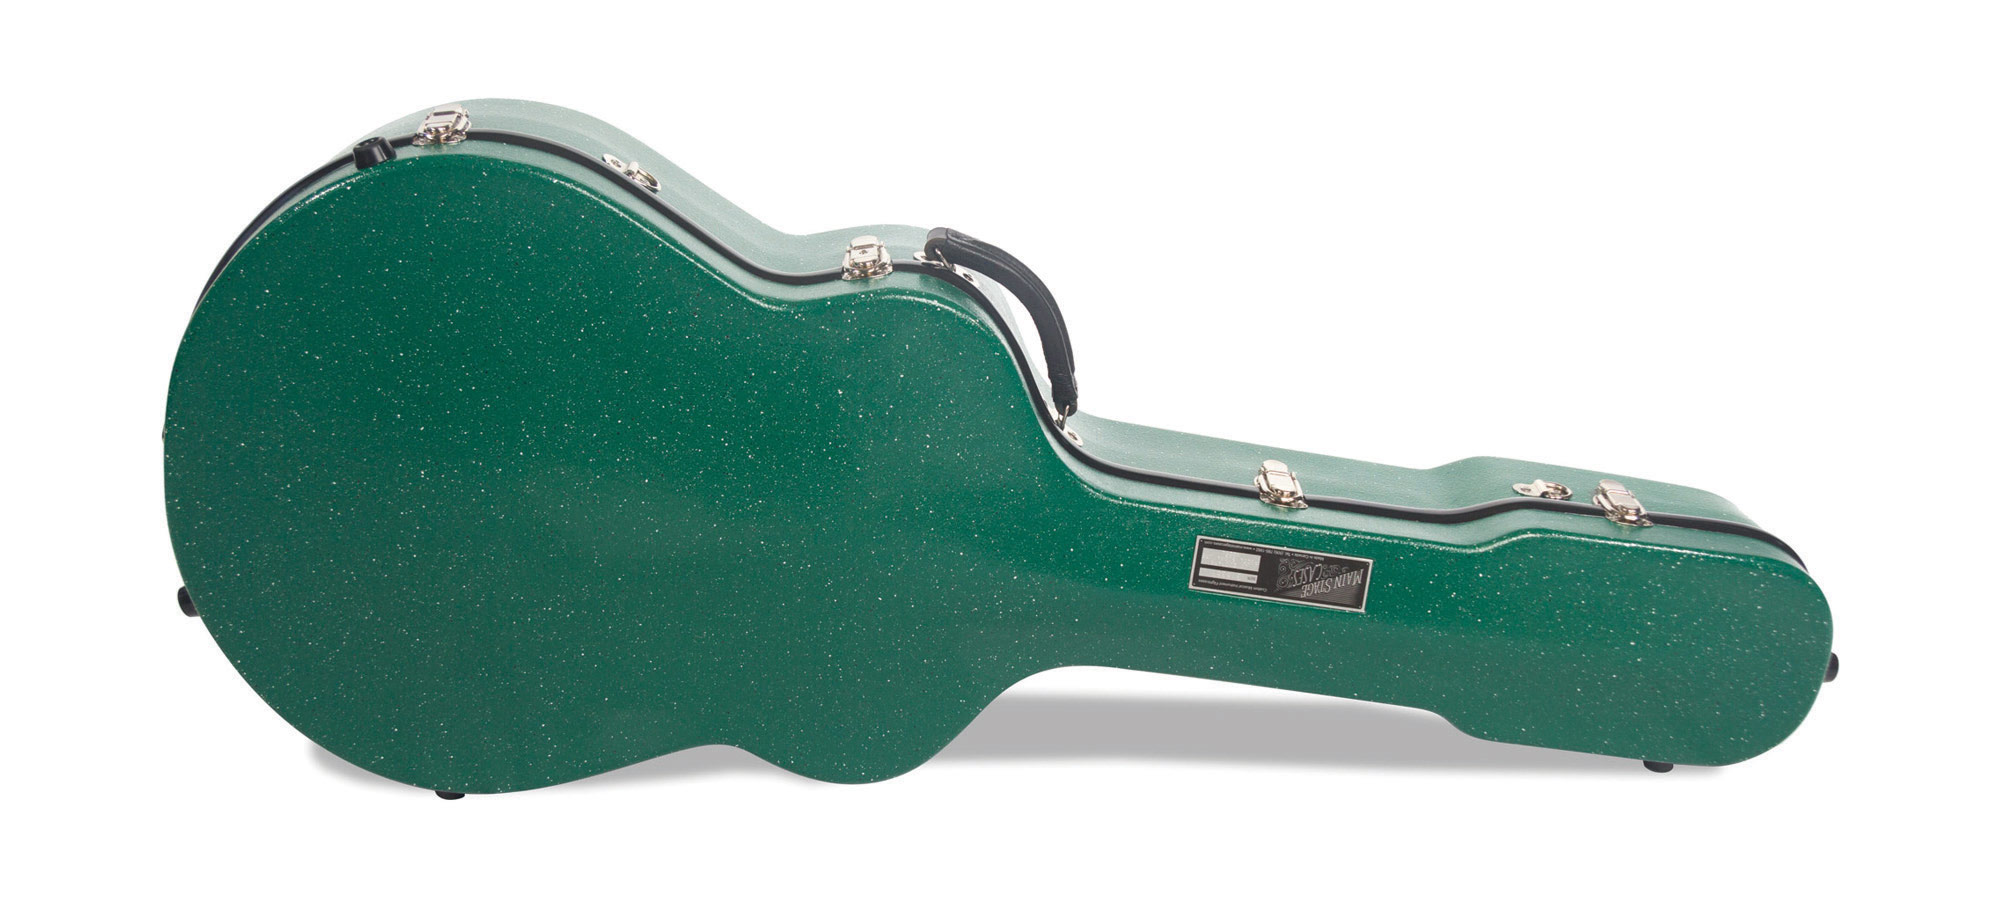 mainstage-guitar-green